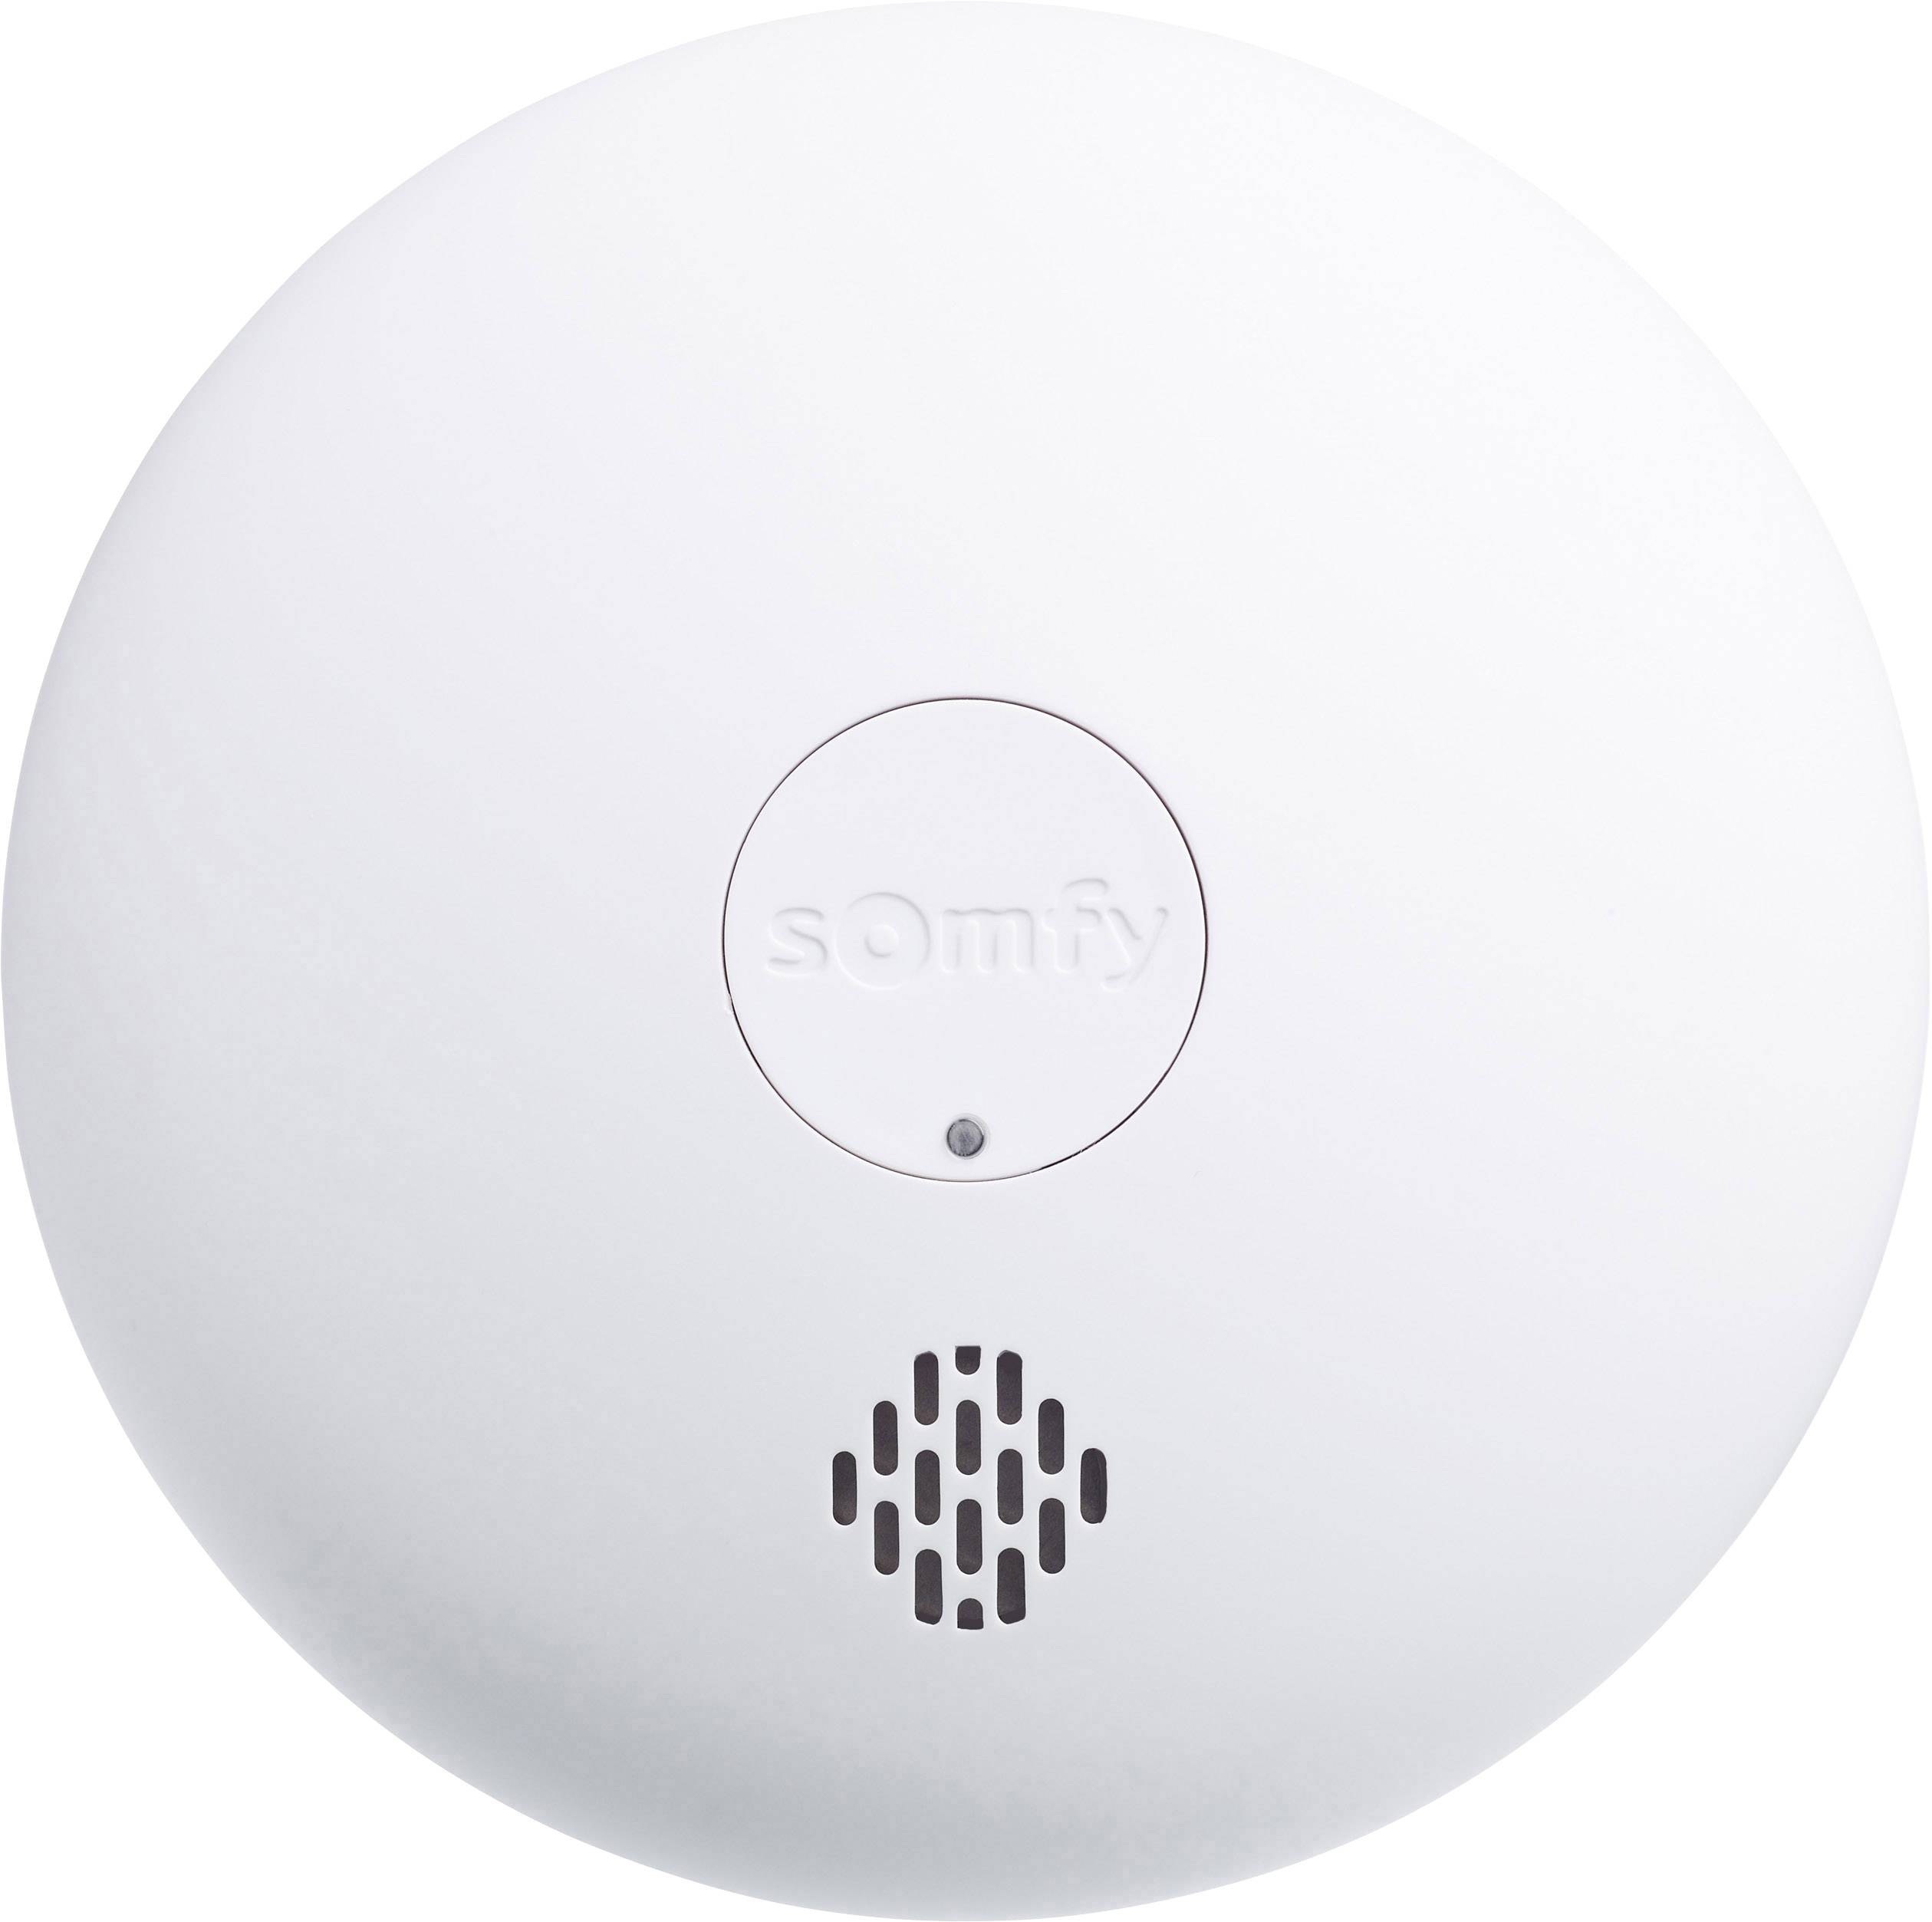 Somfy Home Alarm Video review